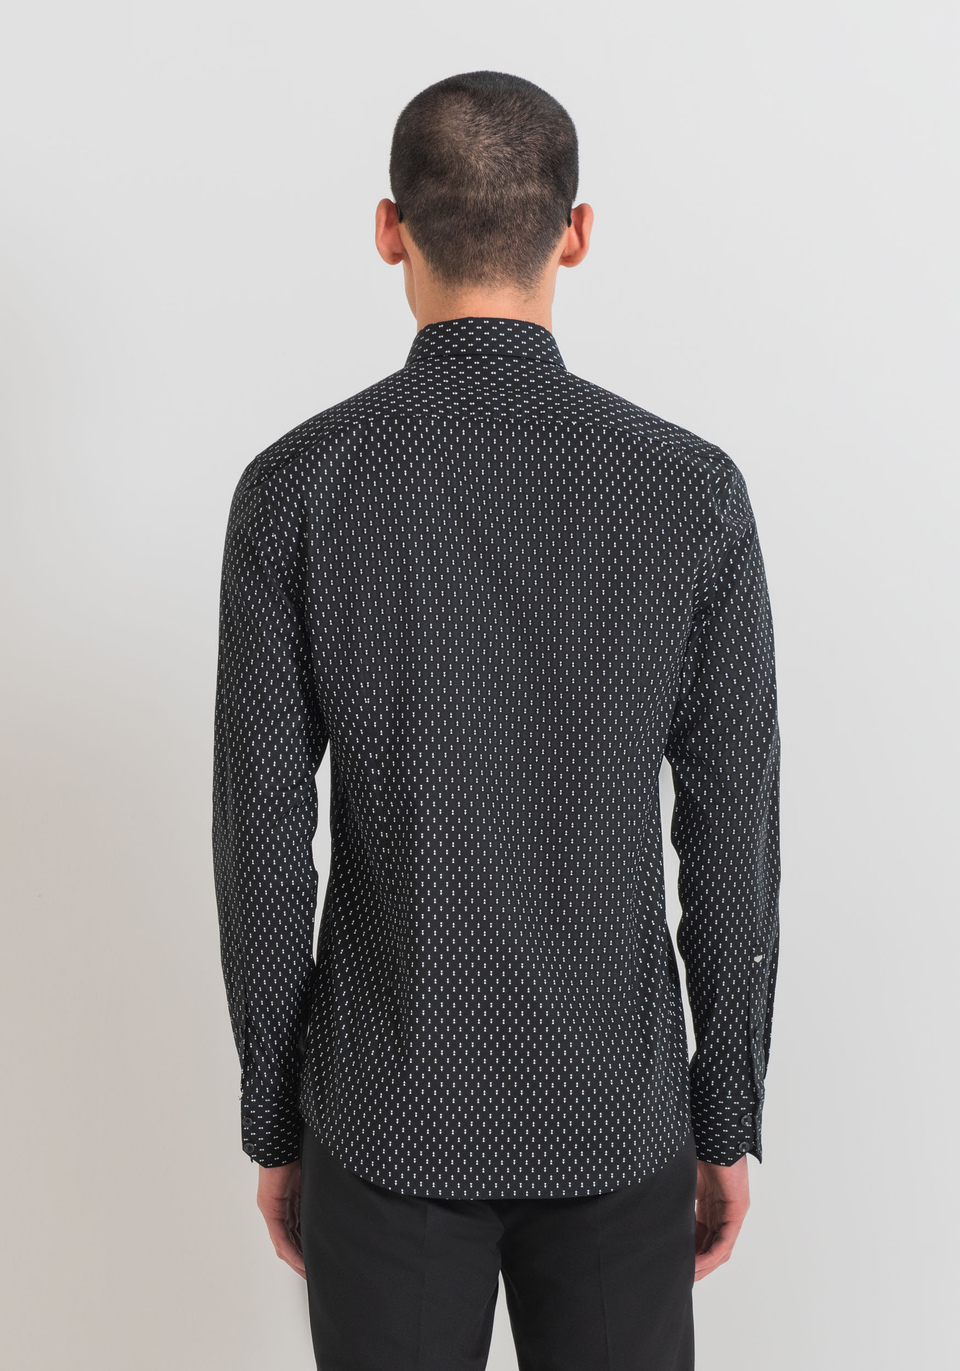 "NAPOLI" SLIM FIT SHIRT IN SOFT-FEEL COTTON WITH ALL-OVER MICRO PRINT - Antony Morato Online Shop